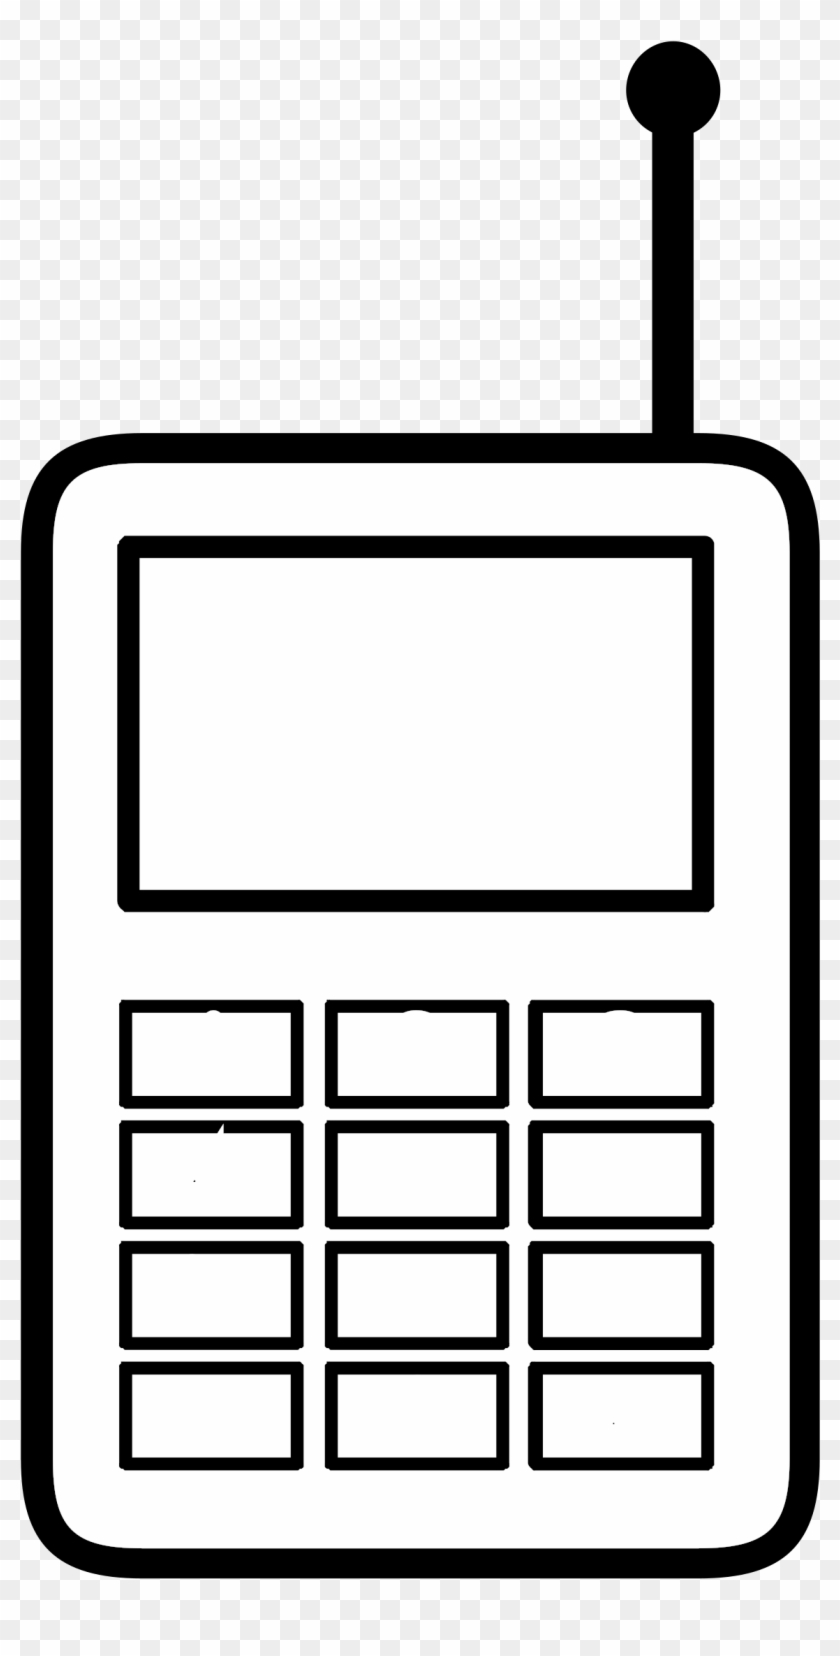 Big Image - Cellphone Clipart Black And White #1215088